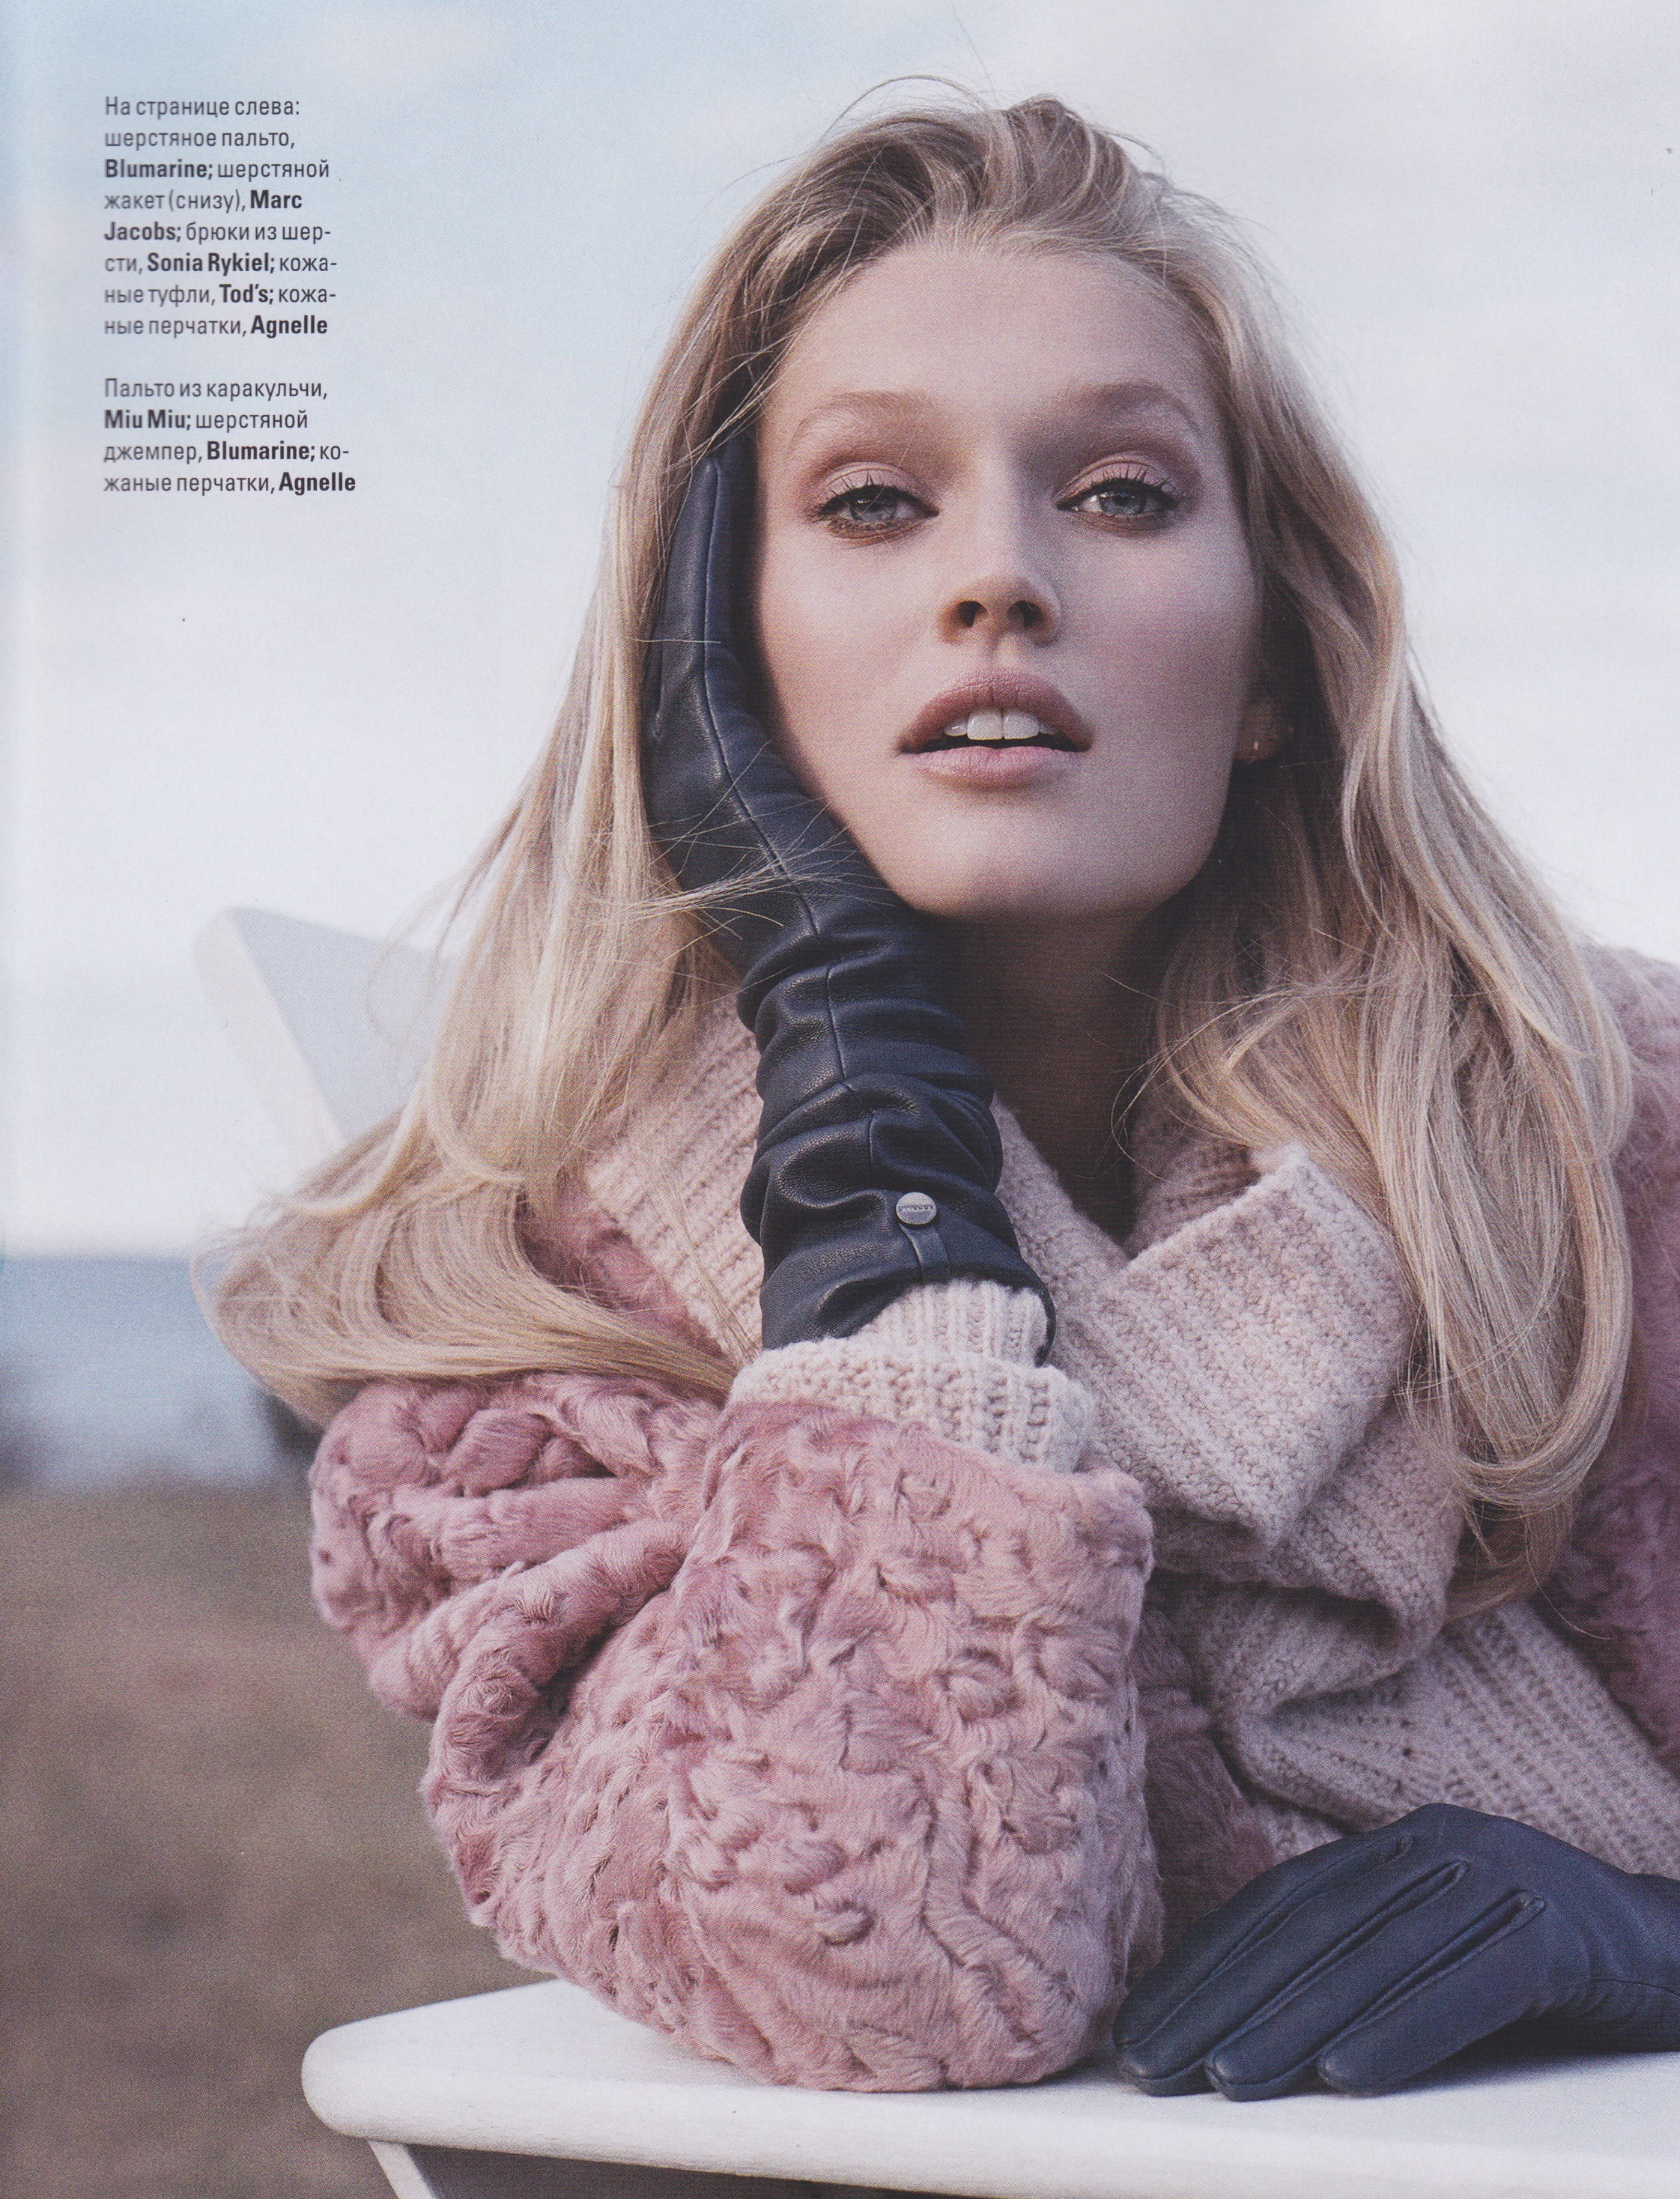 toni garrn photo shoot for vogue ukraine by benny horne and county fair productions 2